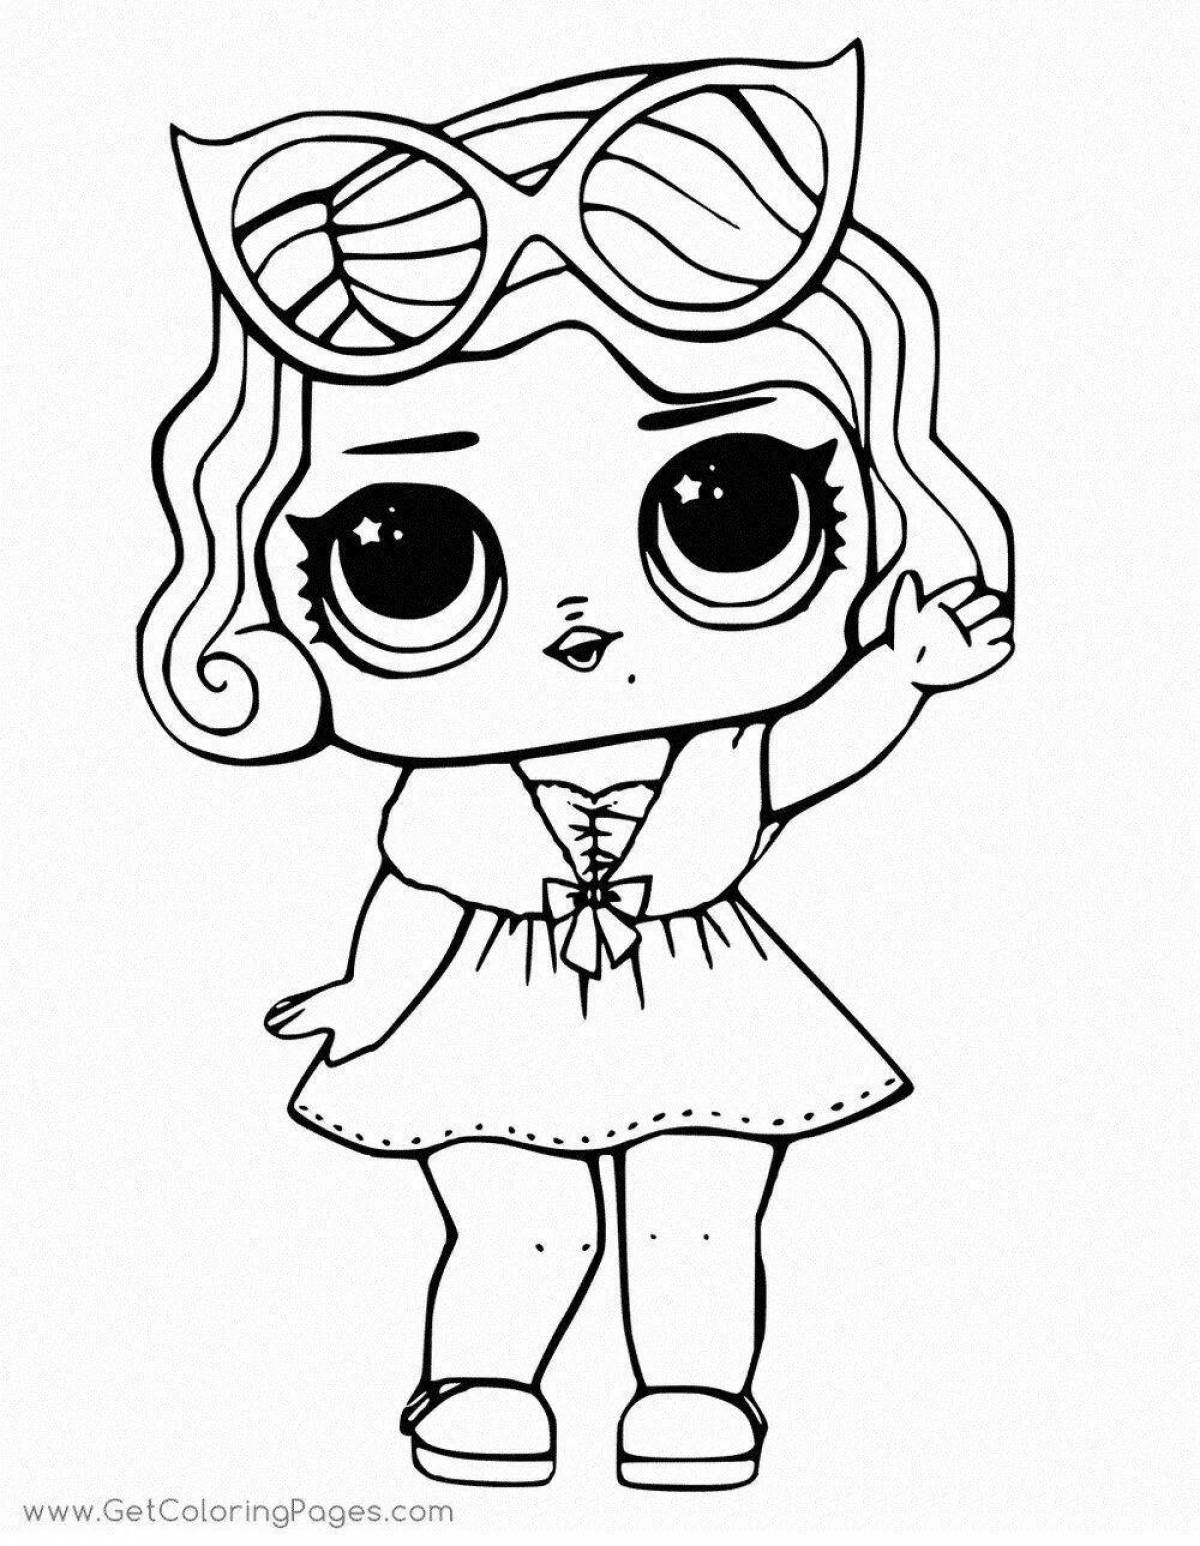 Adorable lol doll coloring book